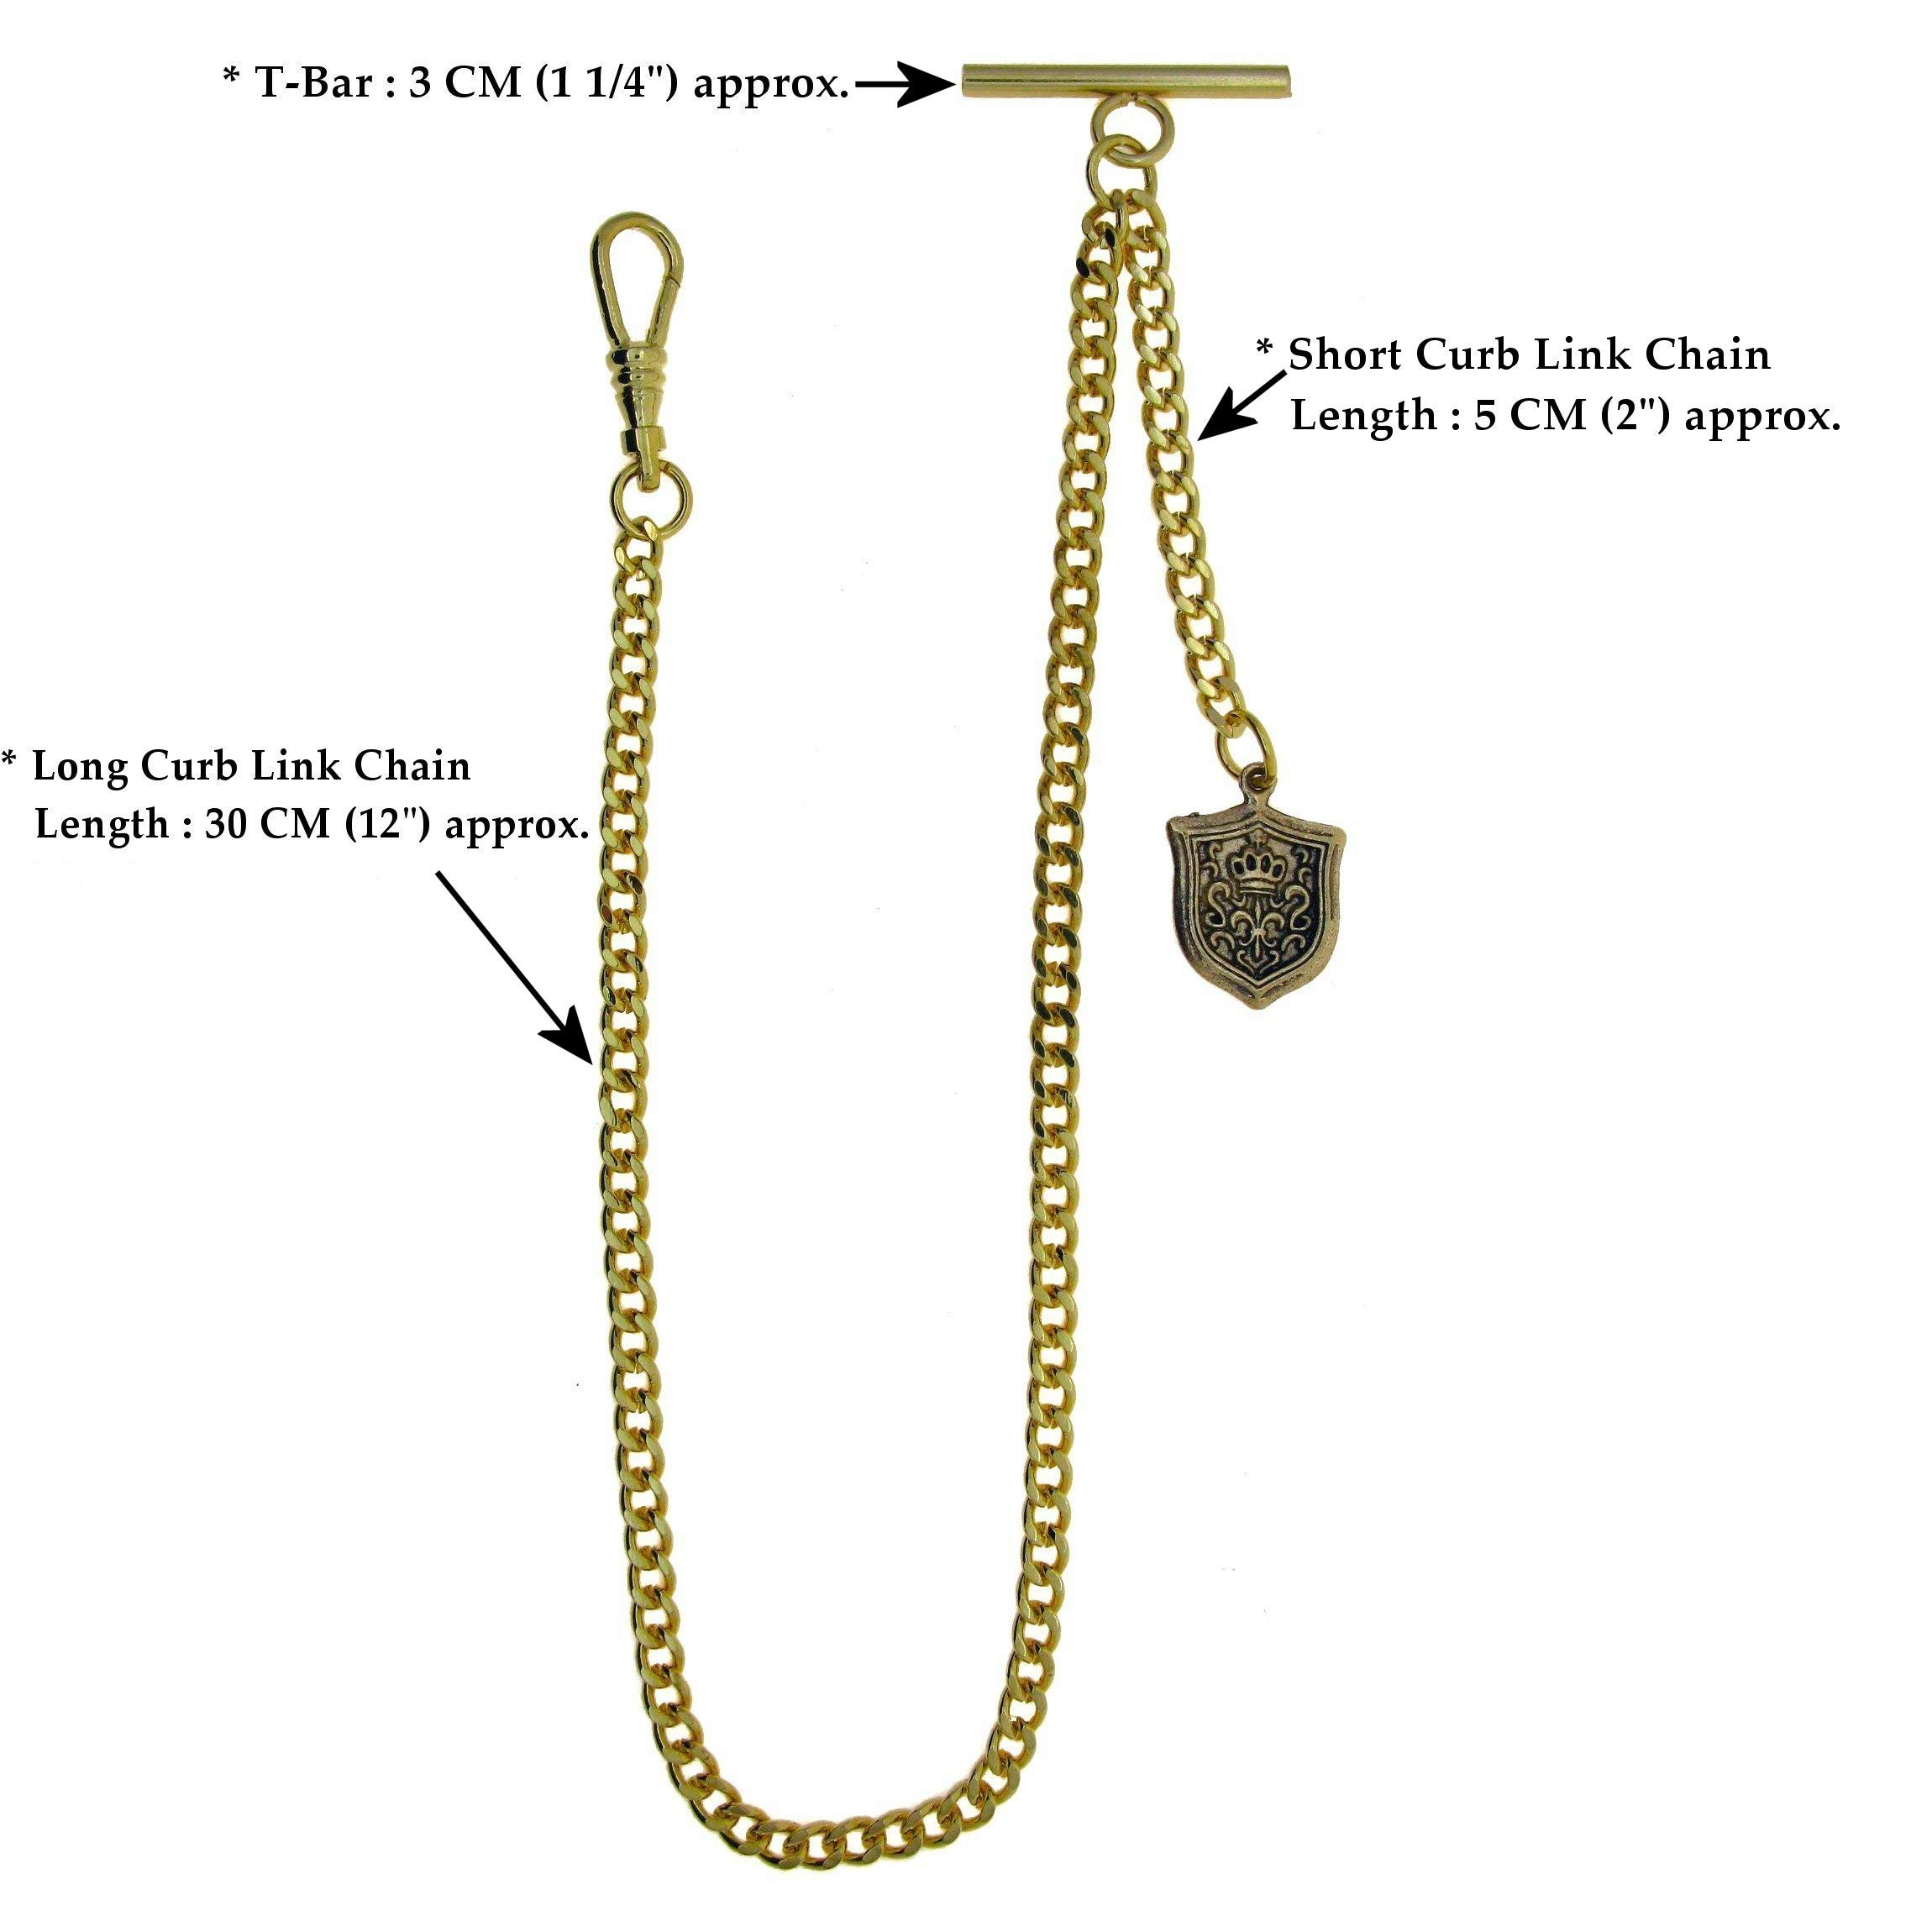 Albert Chain Gold Color Pocket Watch Chains for Men with T Bar Swivel Clasp and Ancient Shield Design Fob AC98